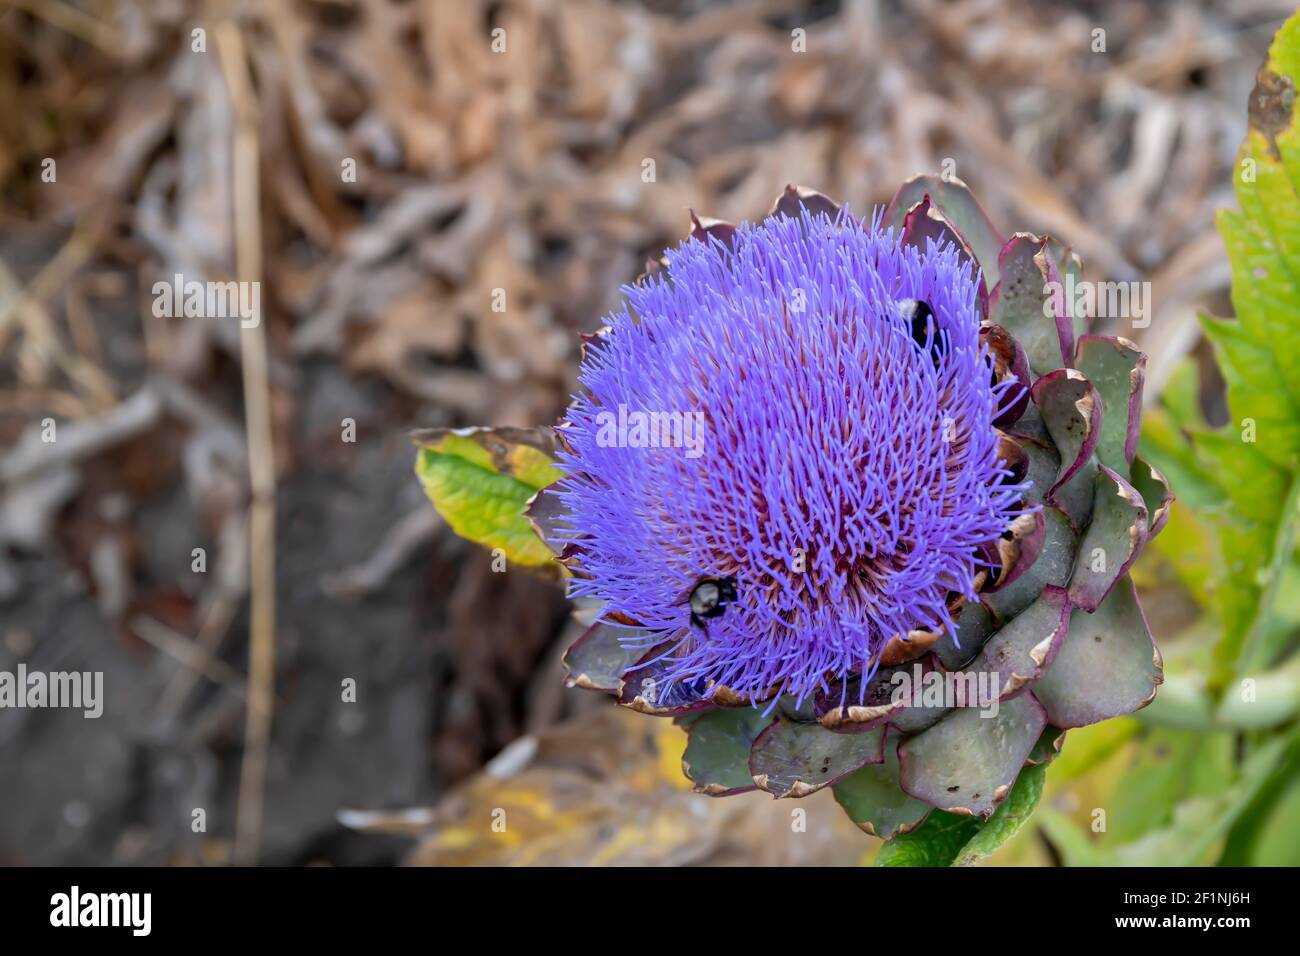 Artichoke flower in nature. This vibrant purple flower turns a delicious and traditional meal with olive oil of Turkish and Greek cuisine. Stock Photo